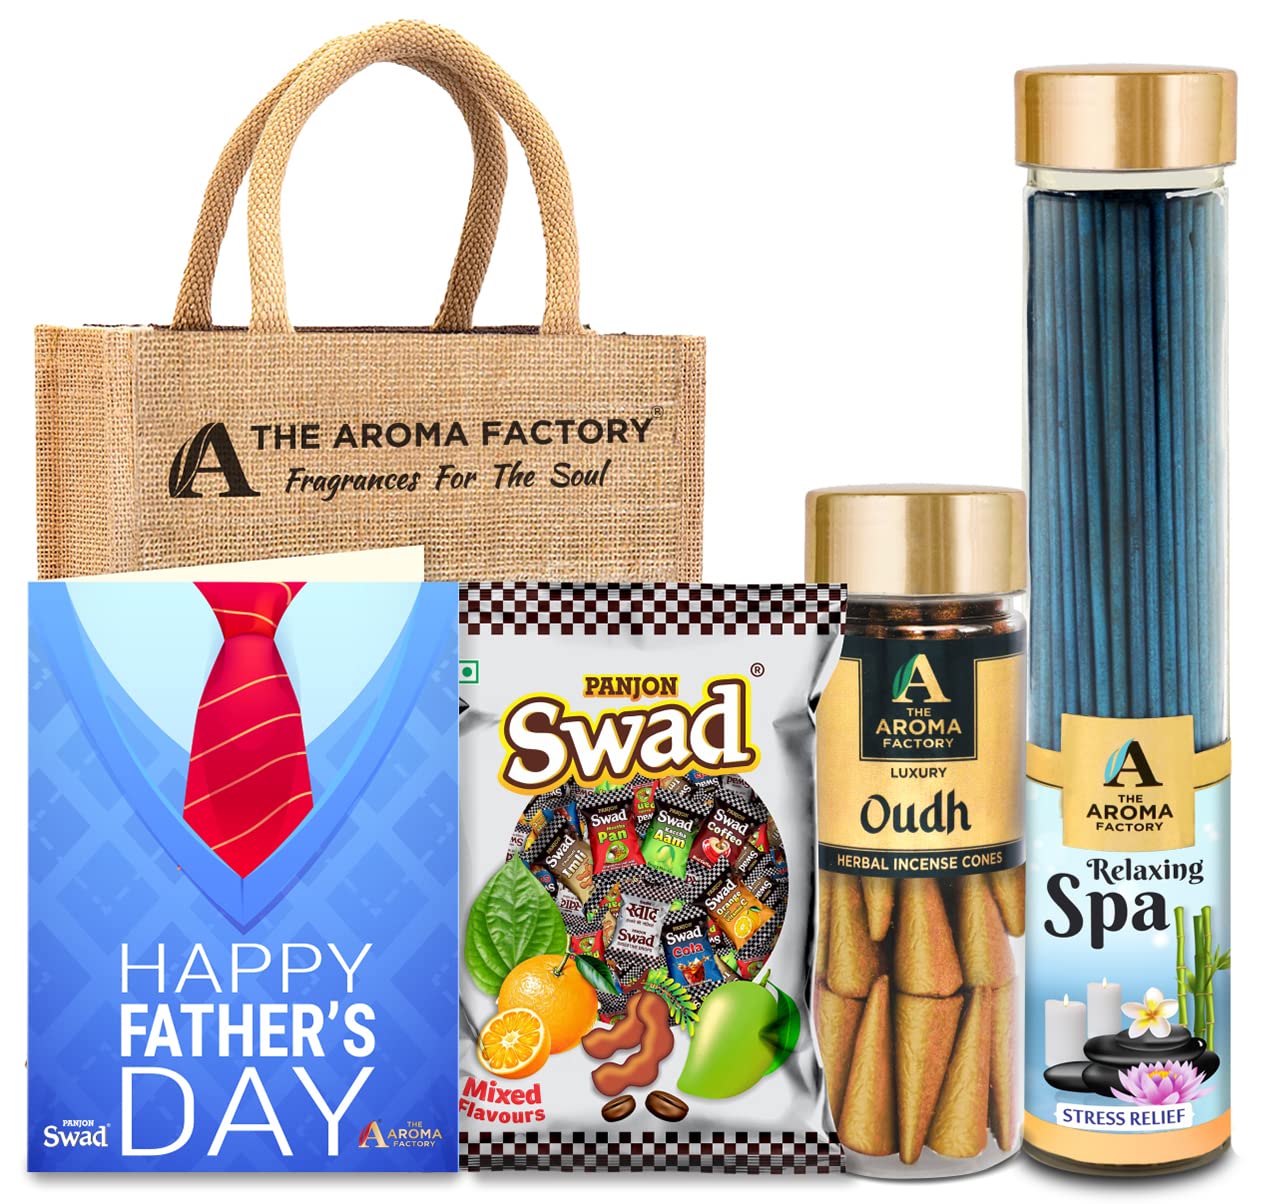 The Aroma Factory Father's Day Hamper Set (Swad Mix 25 Candy, Incense Relaxing Spa Agarbatti, Oudh Dhoopcone, Greeting Card, Jute Bag) Gift Item